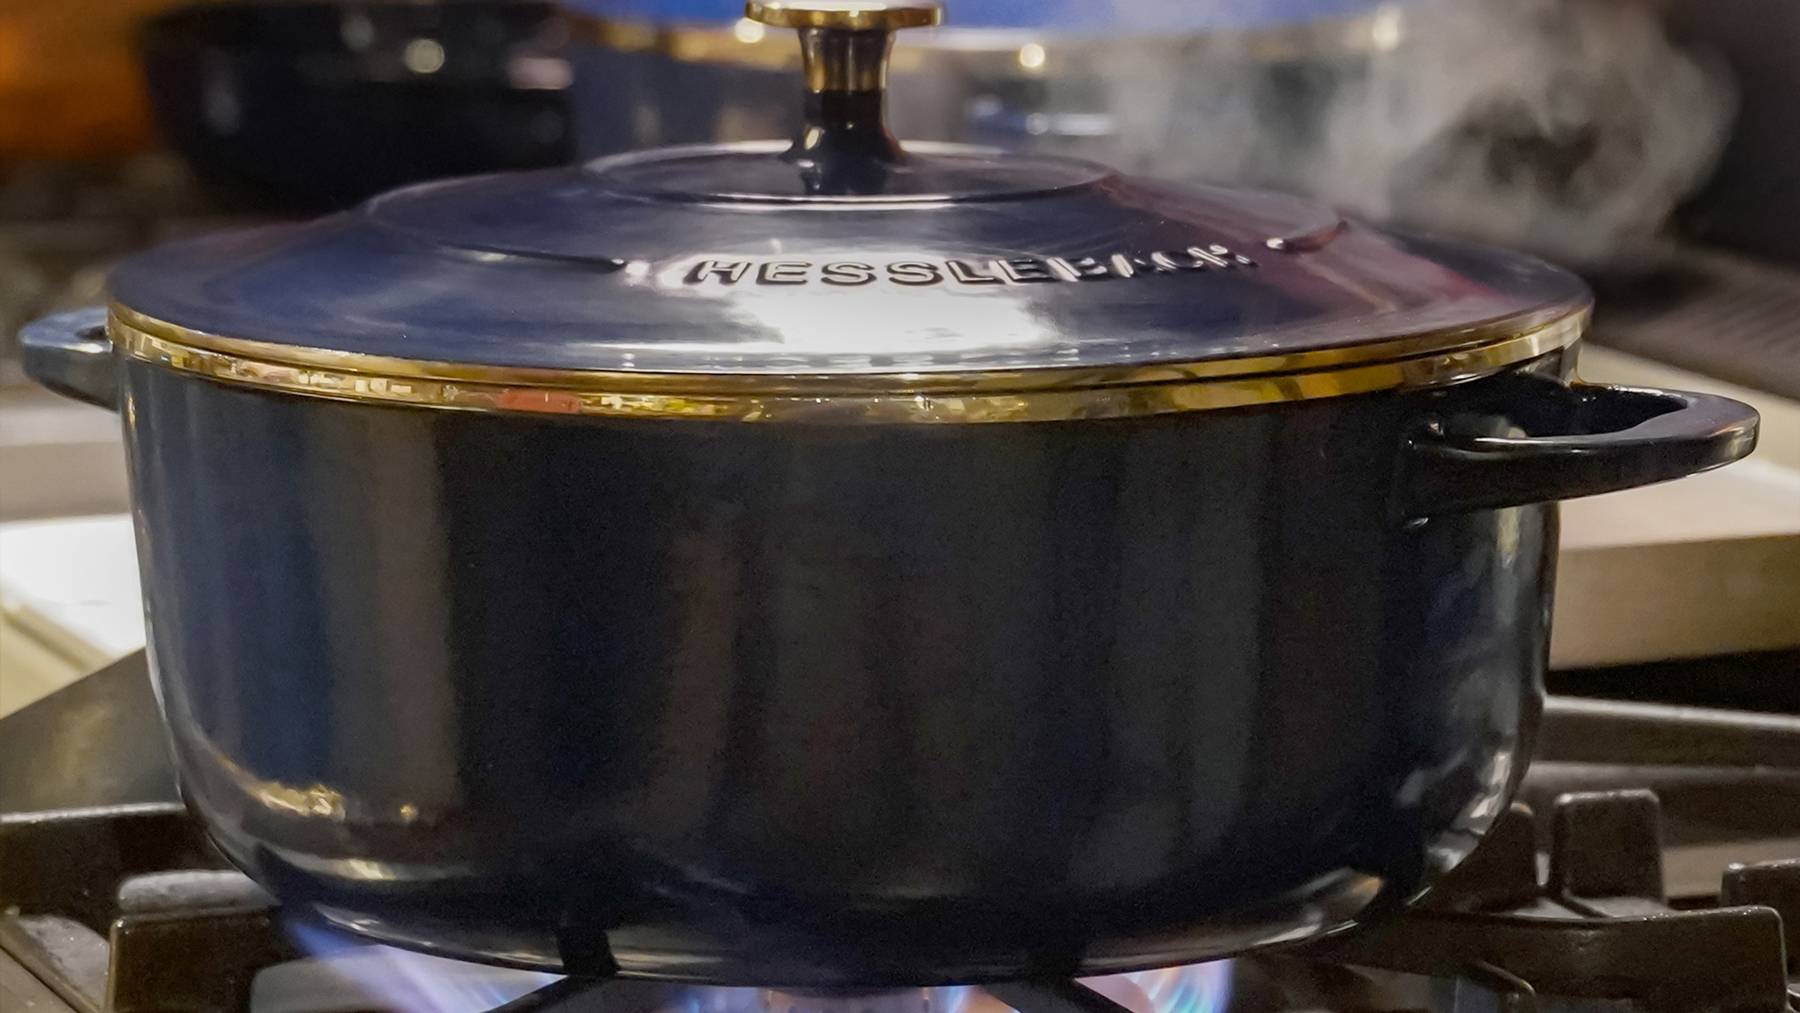 Hesslebach Cookware | Turning Heat Into Cooking Magic